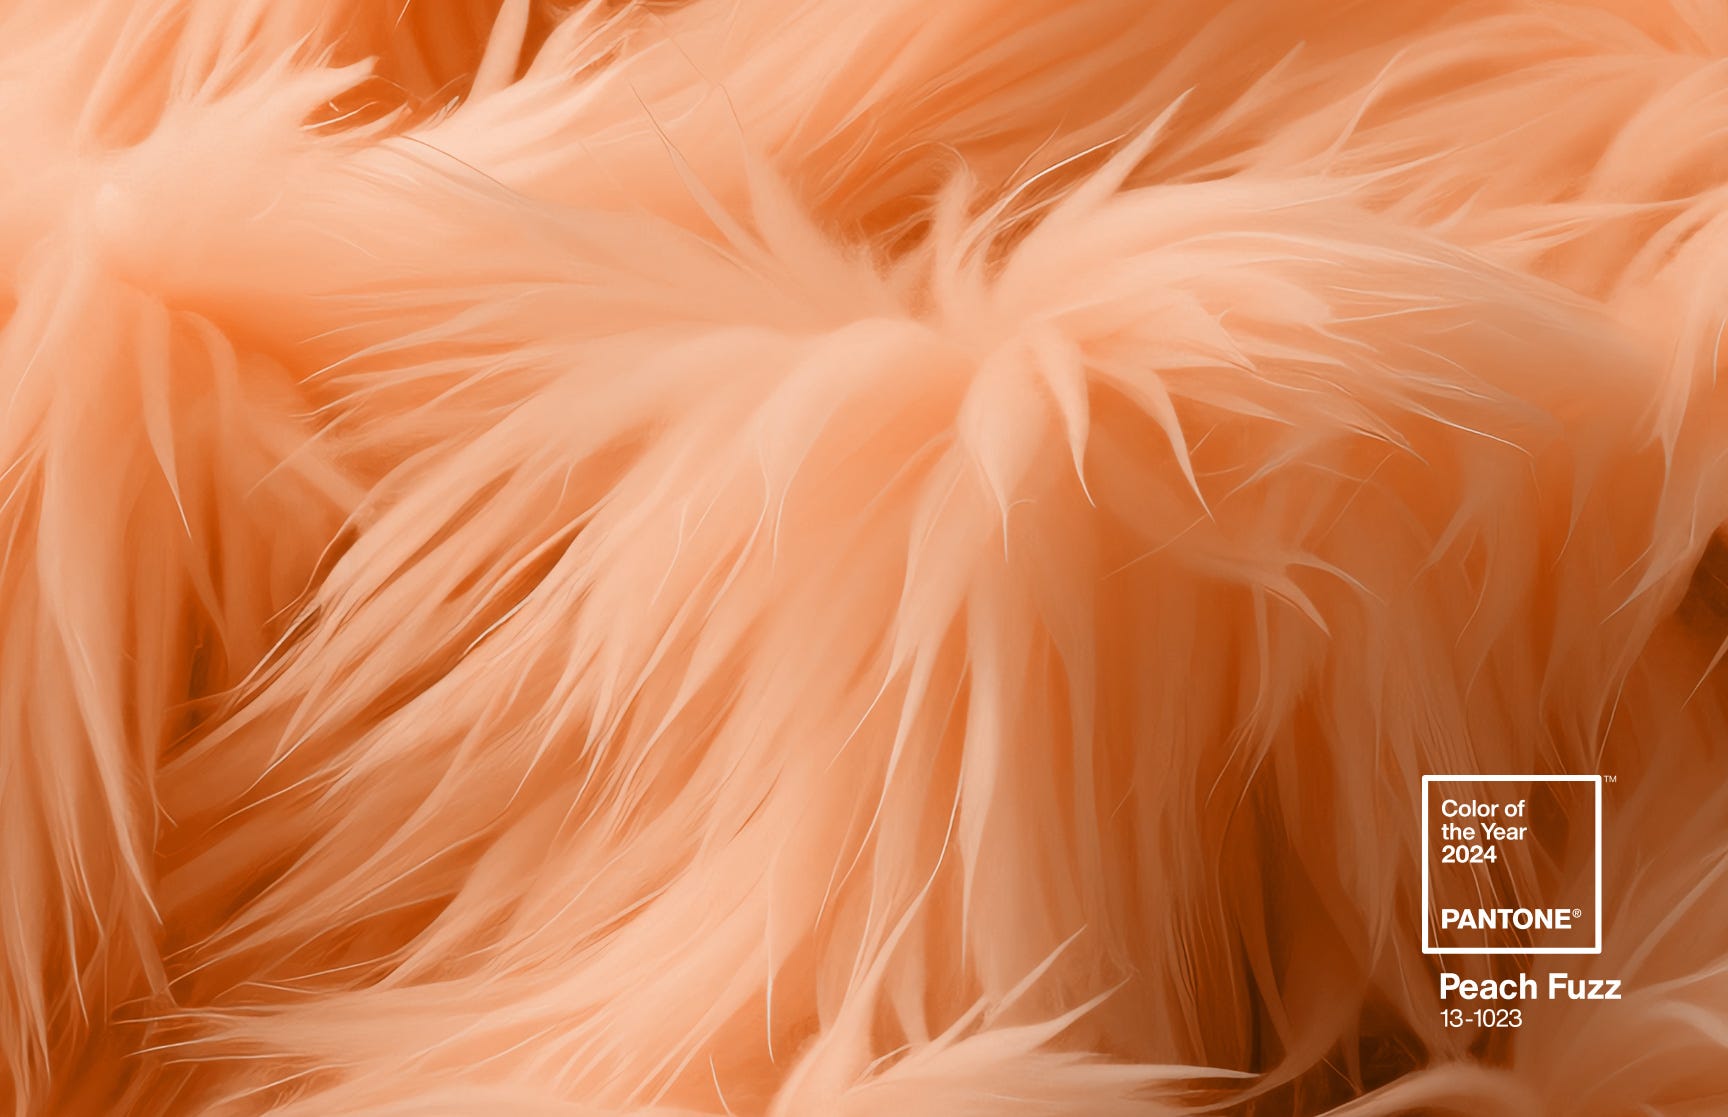 Pantone’s Color of the Year 2024: Peach Fuzz